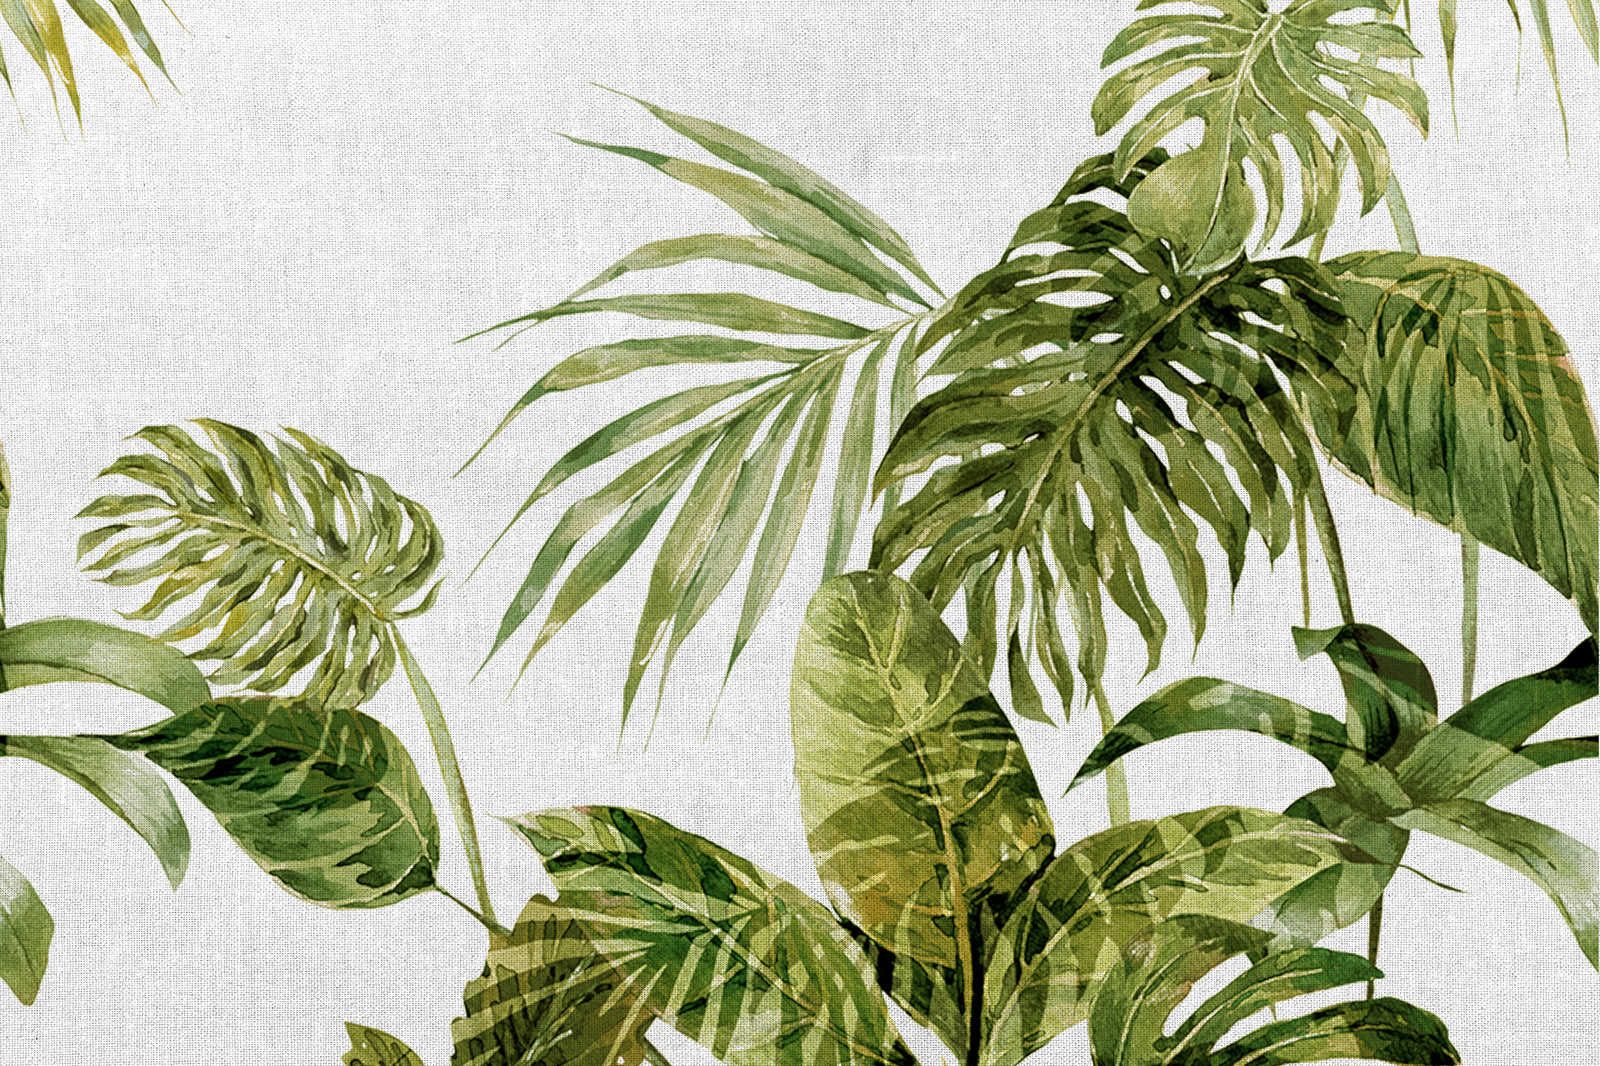             Tropical Canvas Painting Watercolour Monstera Leaves - 0.90 m x 0.60 m
        